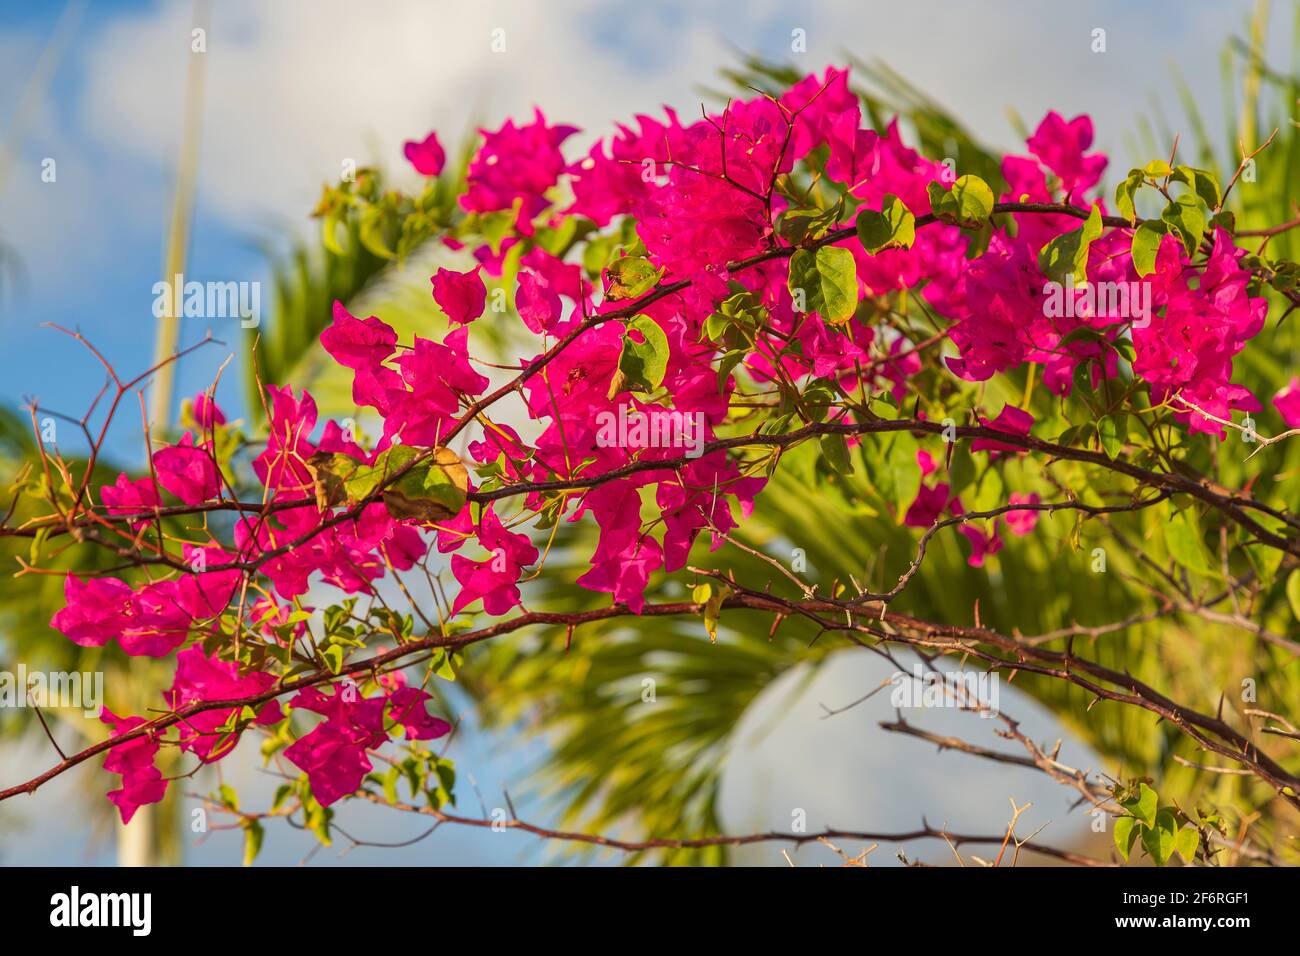 pink bougainvillea flowers with prickly stems Stock Photo